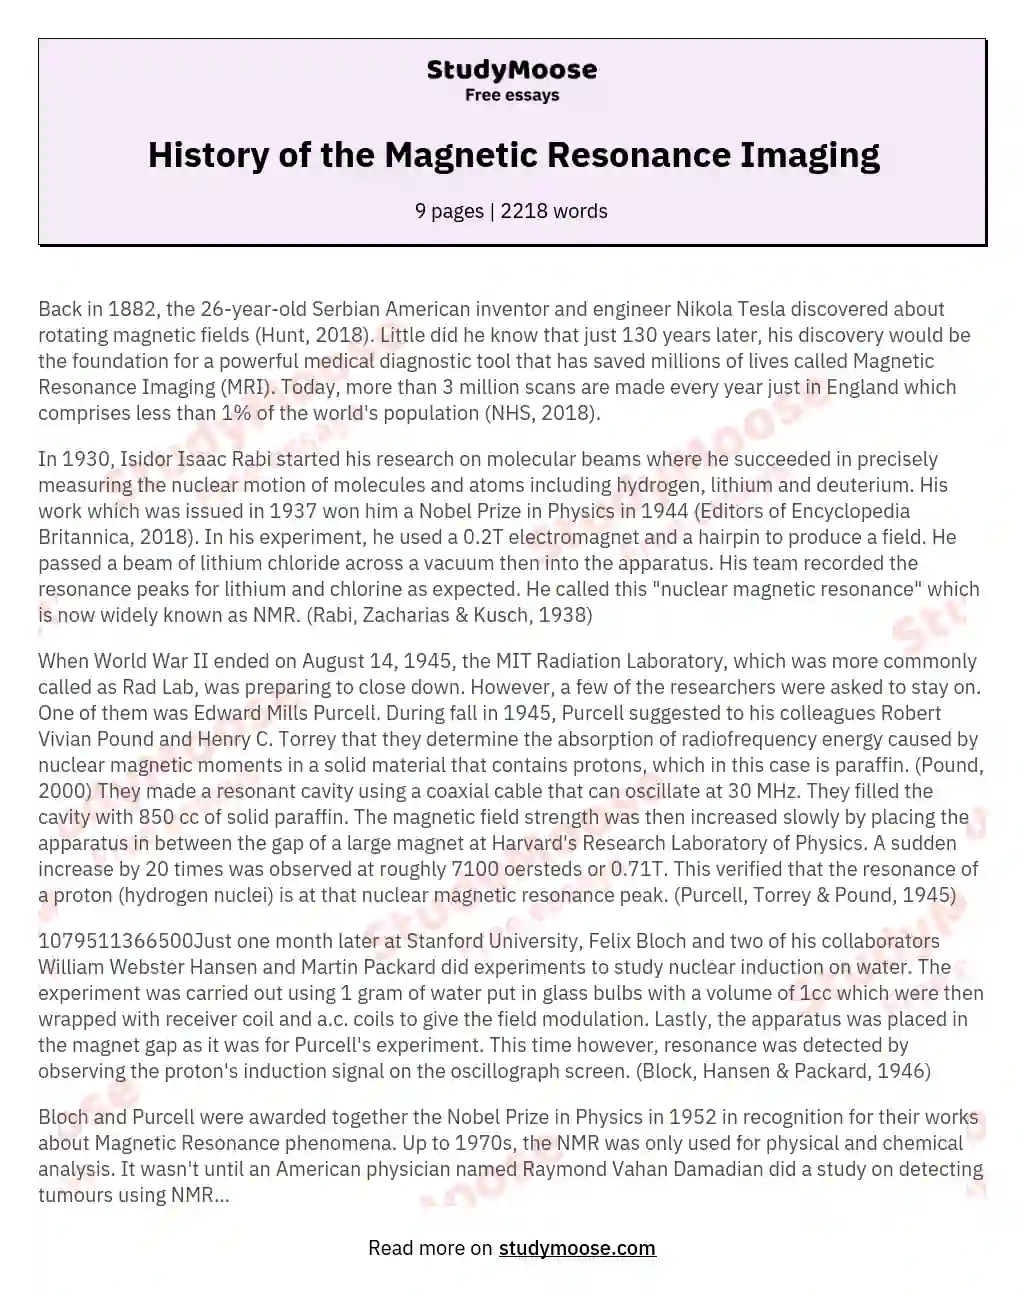 History of the Magnetic Resonance Imaging essay